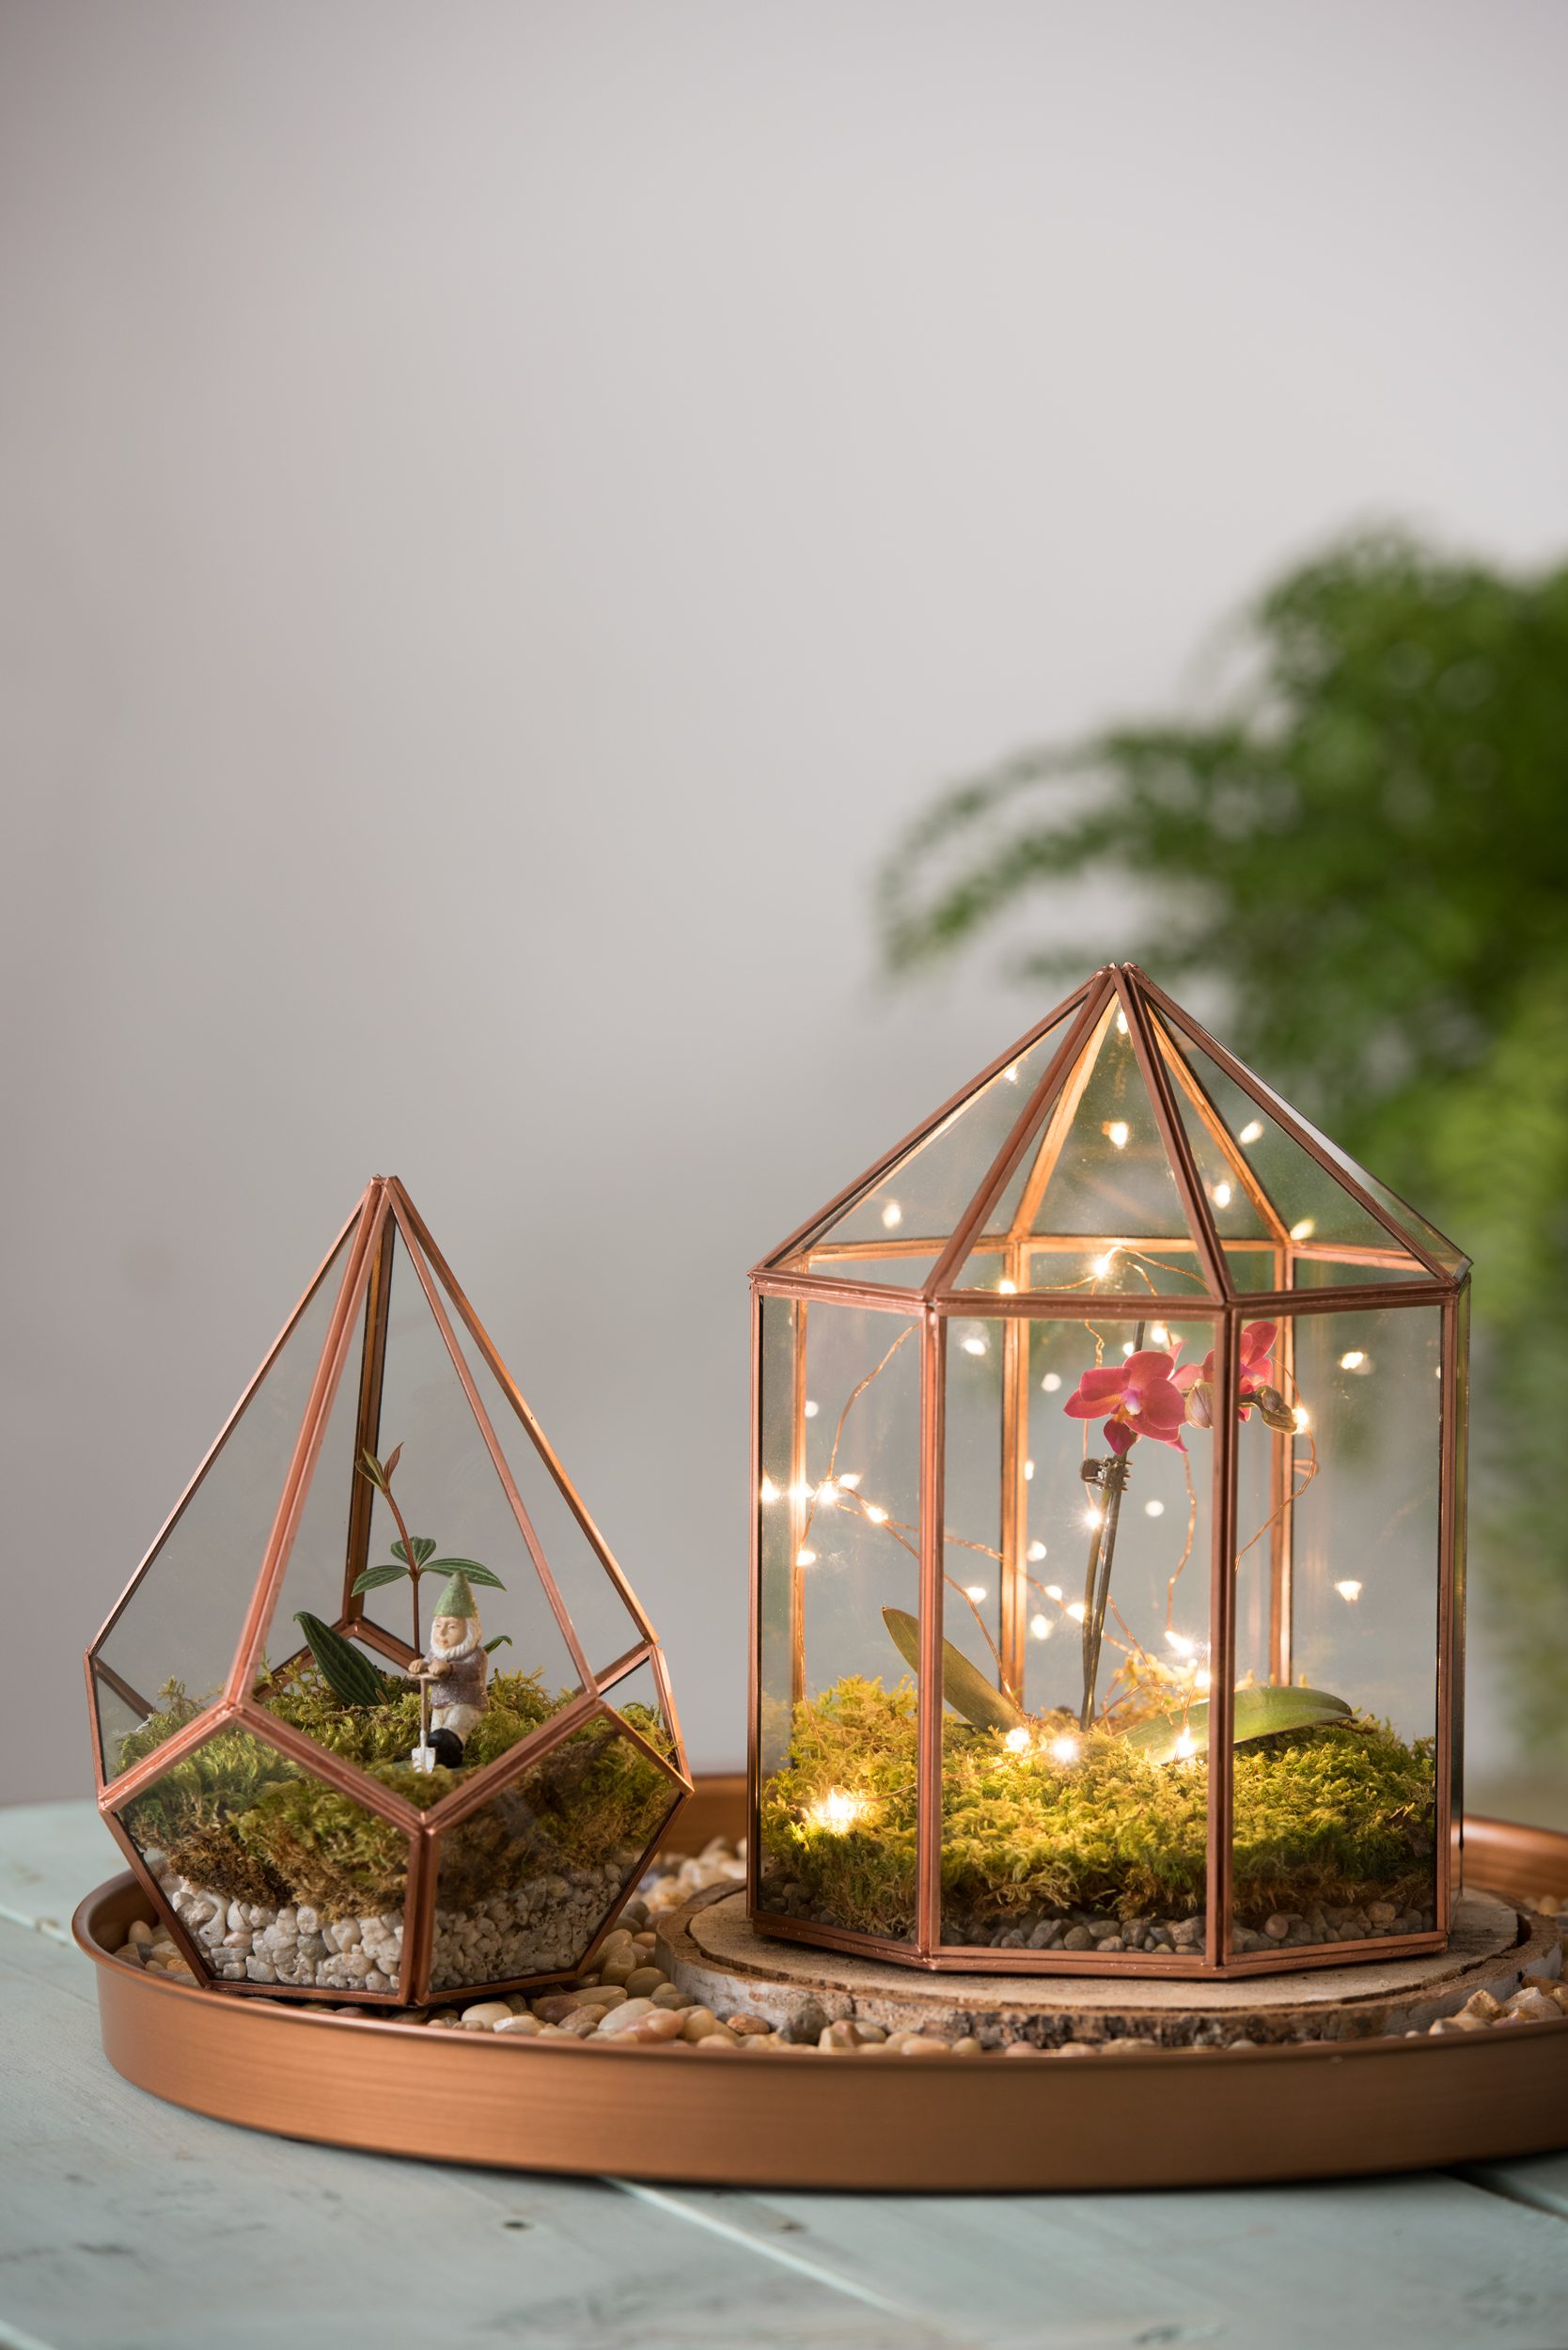 Holiday gifts, such as terrariums, provide year round enjoyment by enabling people to grow no matter the weather outside.